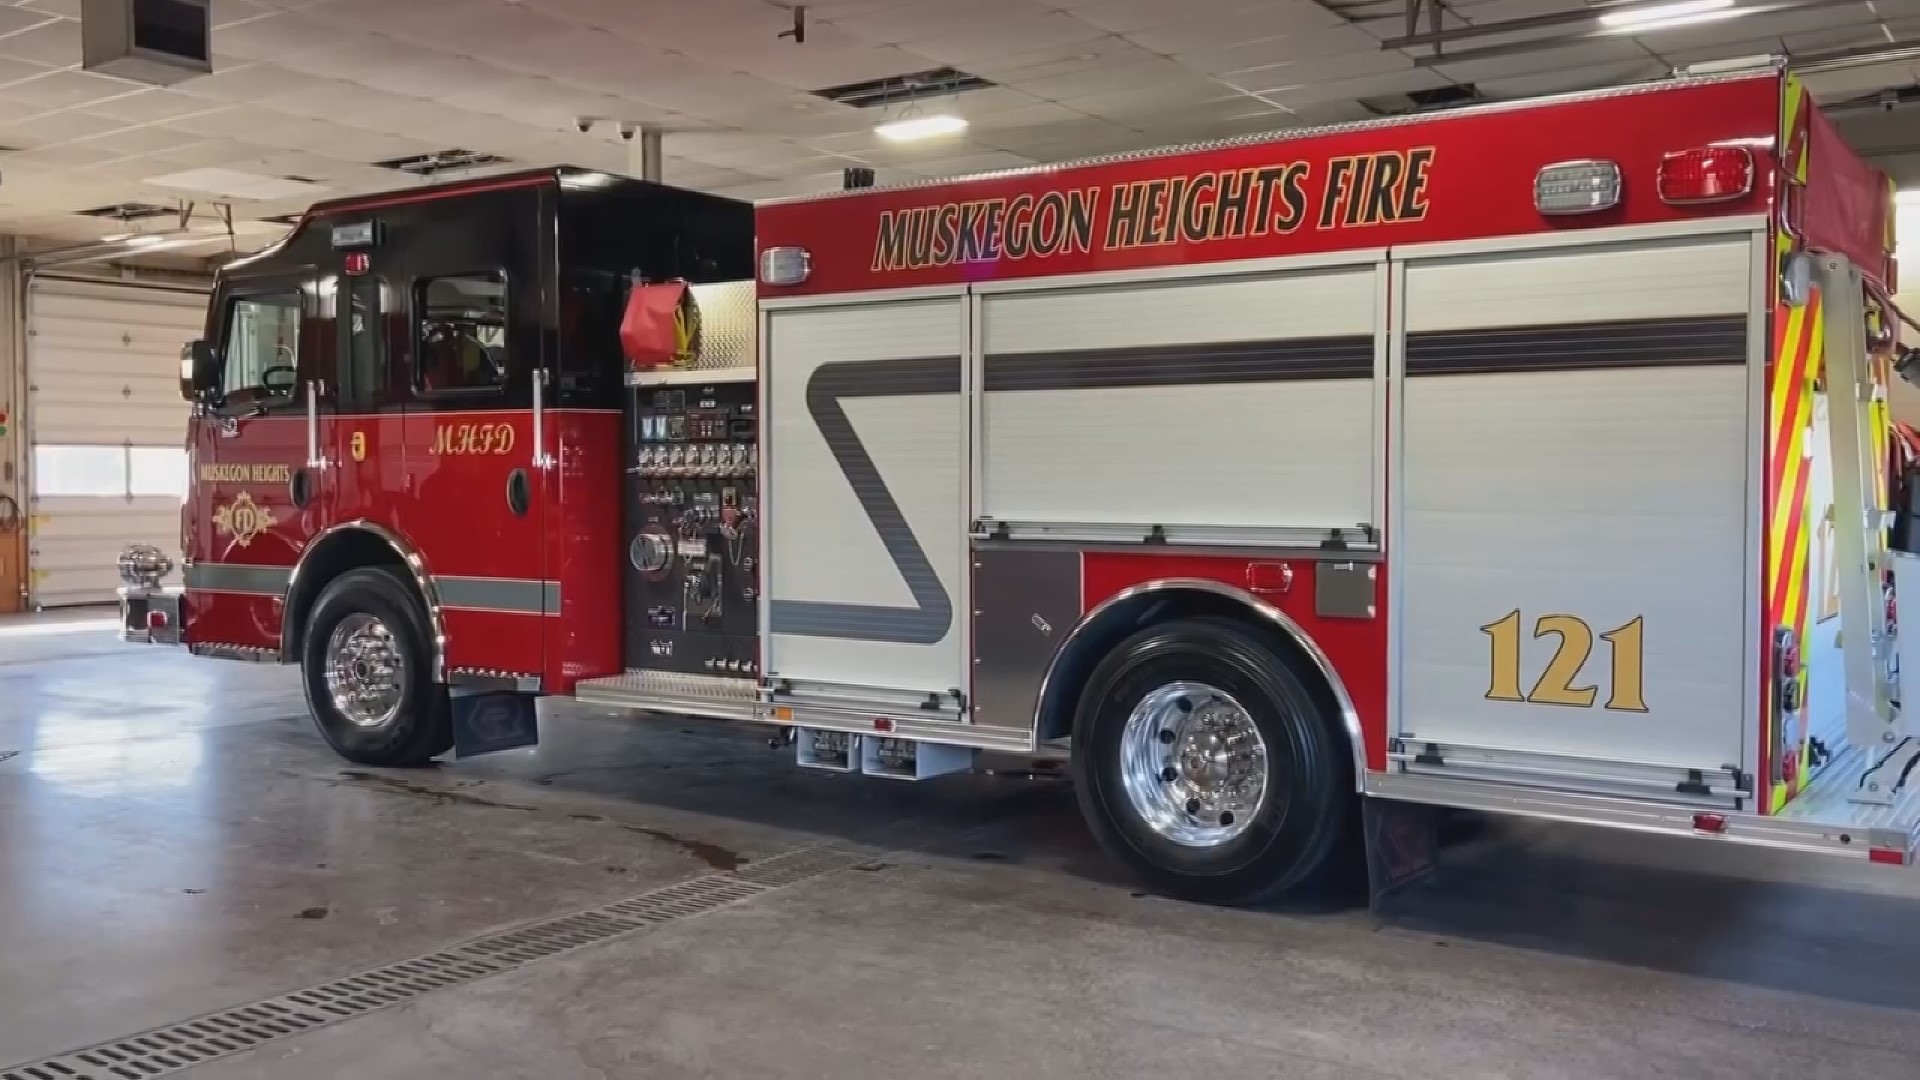 A new fire truck has found a home in the Muskegon Heights Fire Department garage.